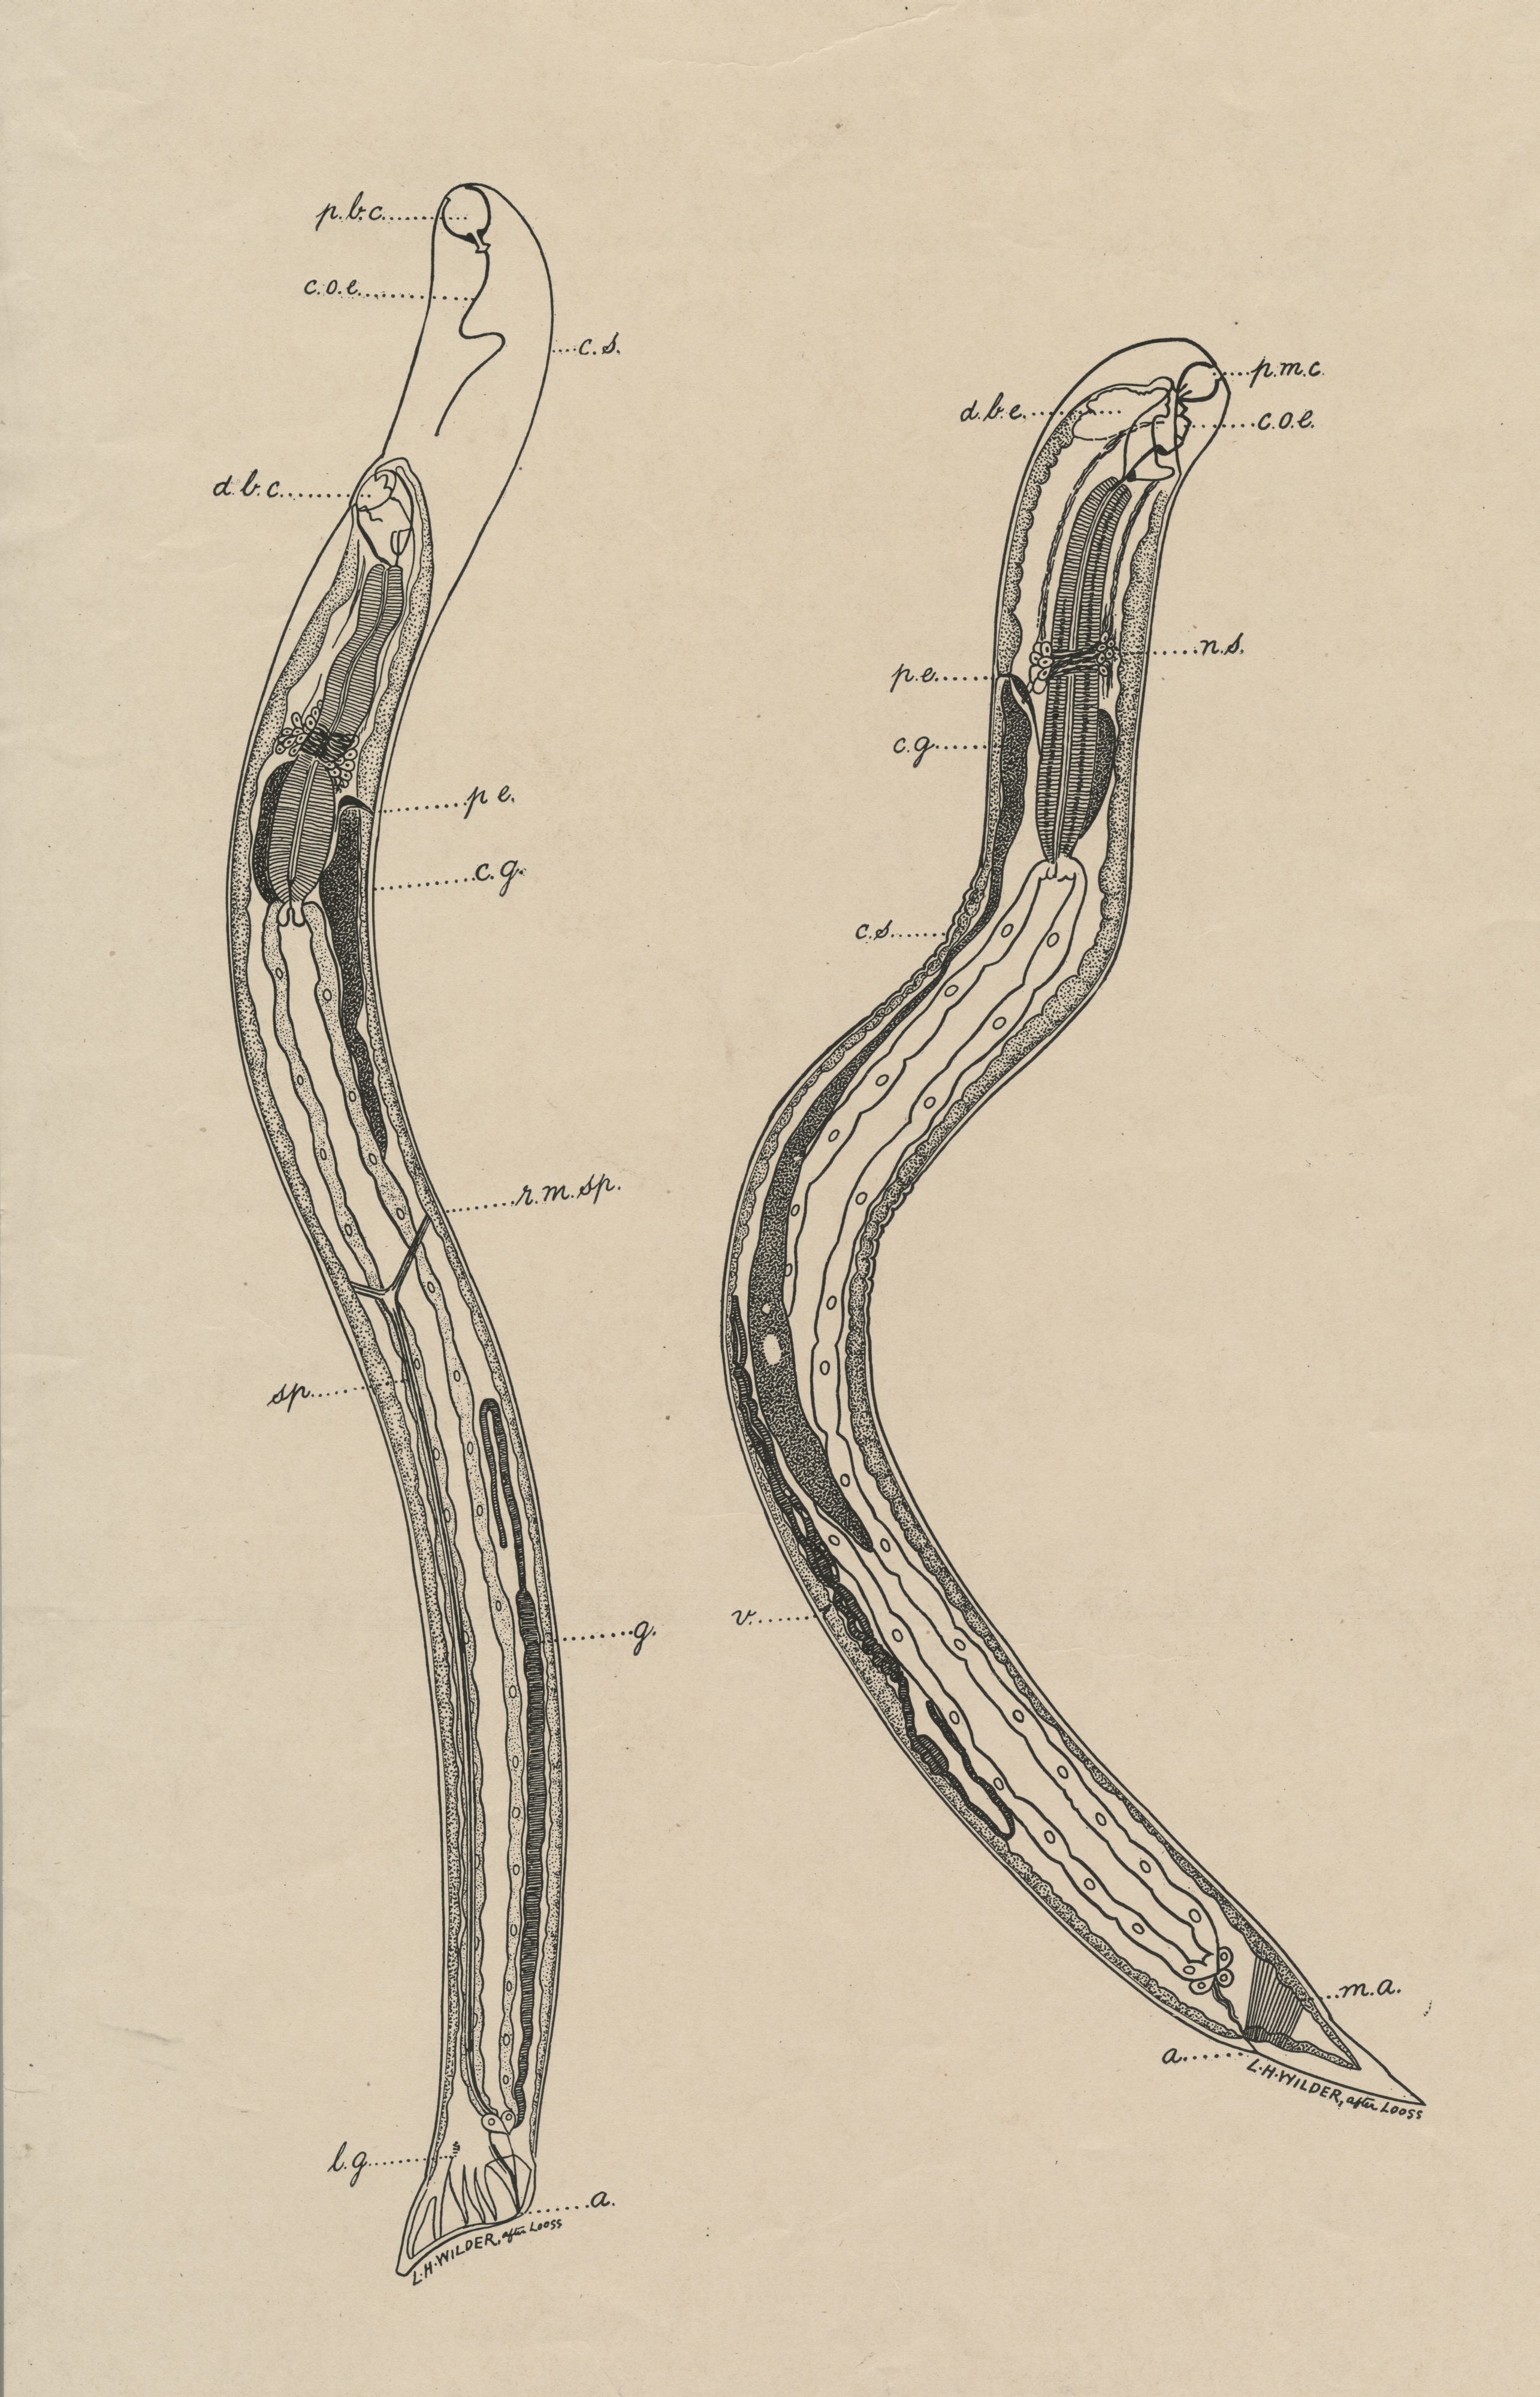 Male and female hookworms, Anchylostoma duodenale (European hookworm),  figures for Report upon the prevalence and geographic distribution of  hookworm diseaseÃ¢â‚¬Â¦ by C. W. Stiles (1903), Public Health and  Marine-Hospital Service of the